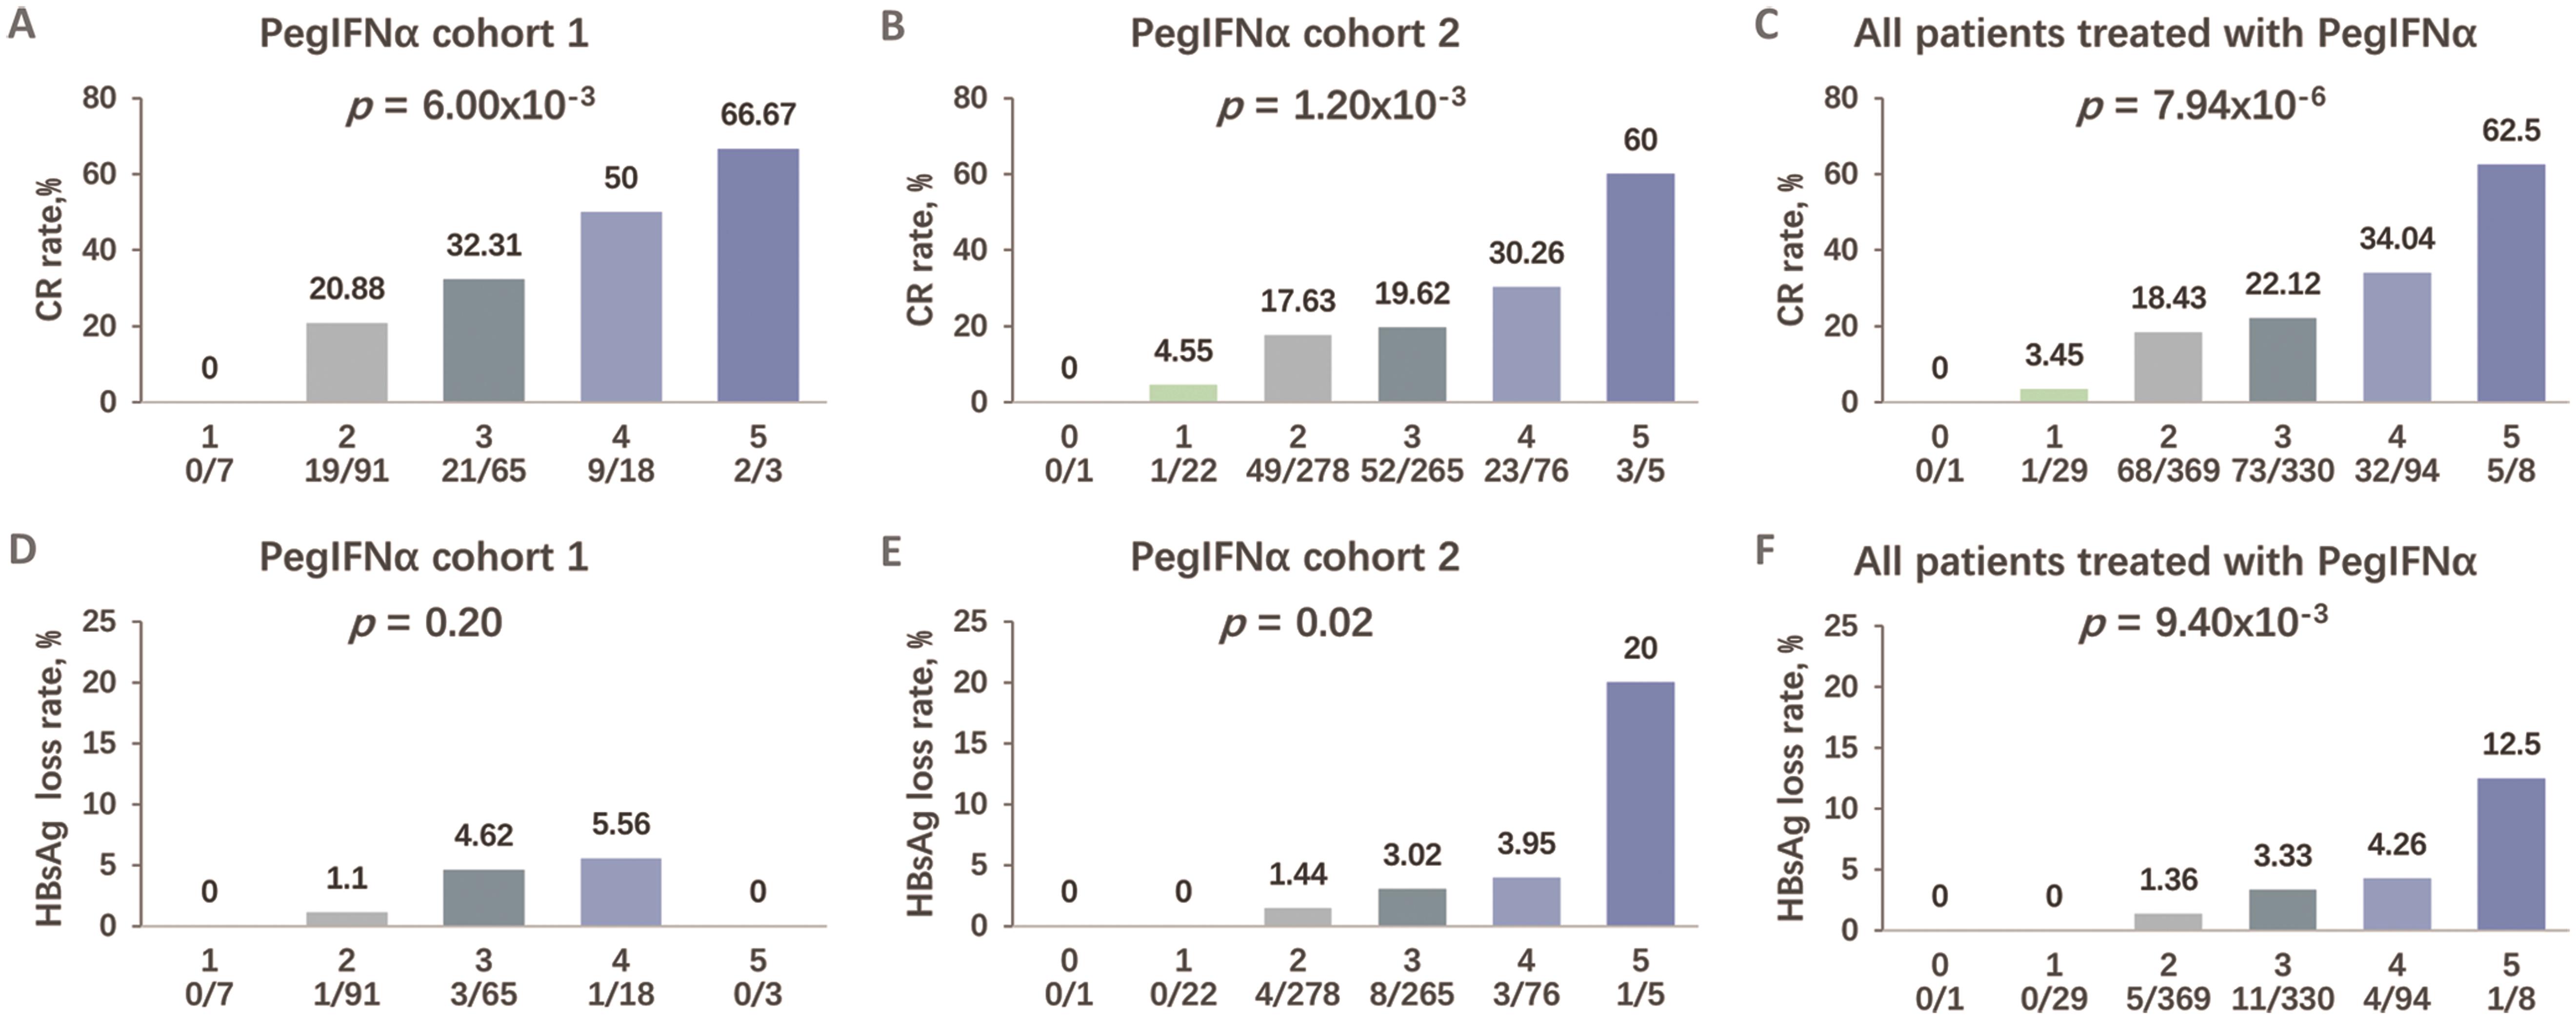 PGS is correlated with the levels of CR and HBsAg loss in the two PegIFNα cohorts.